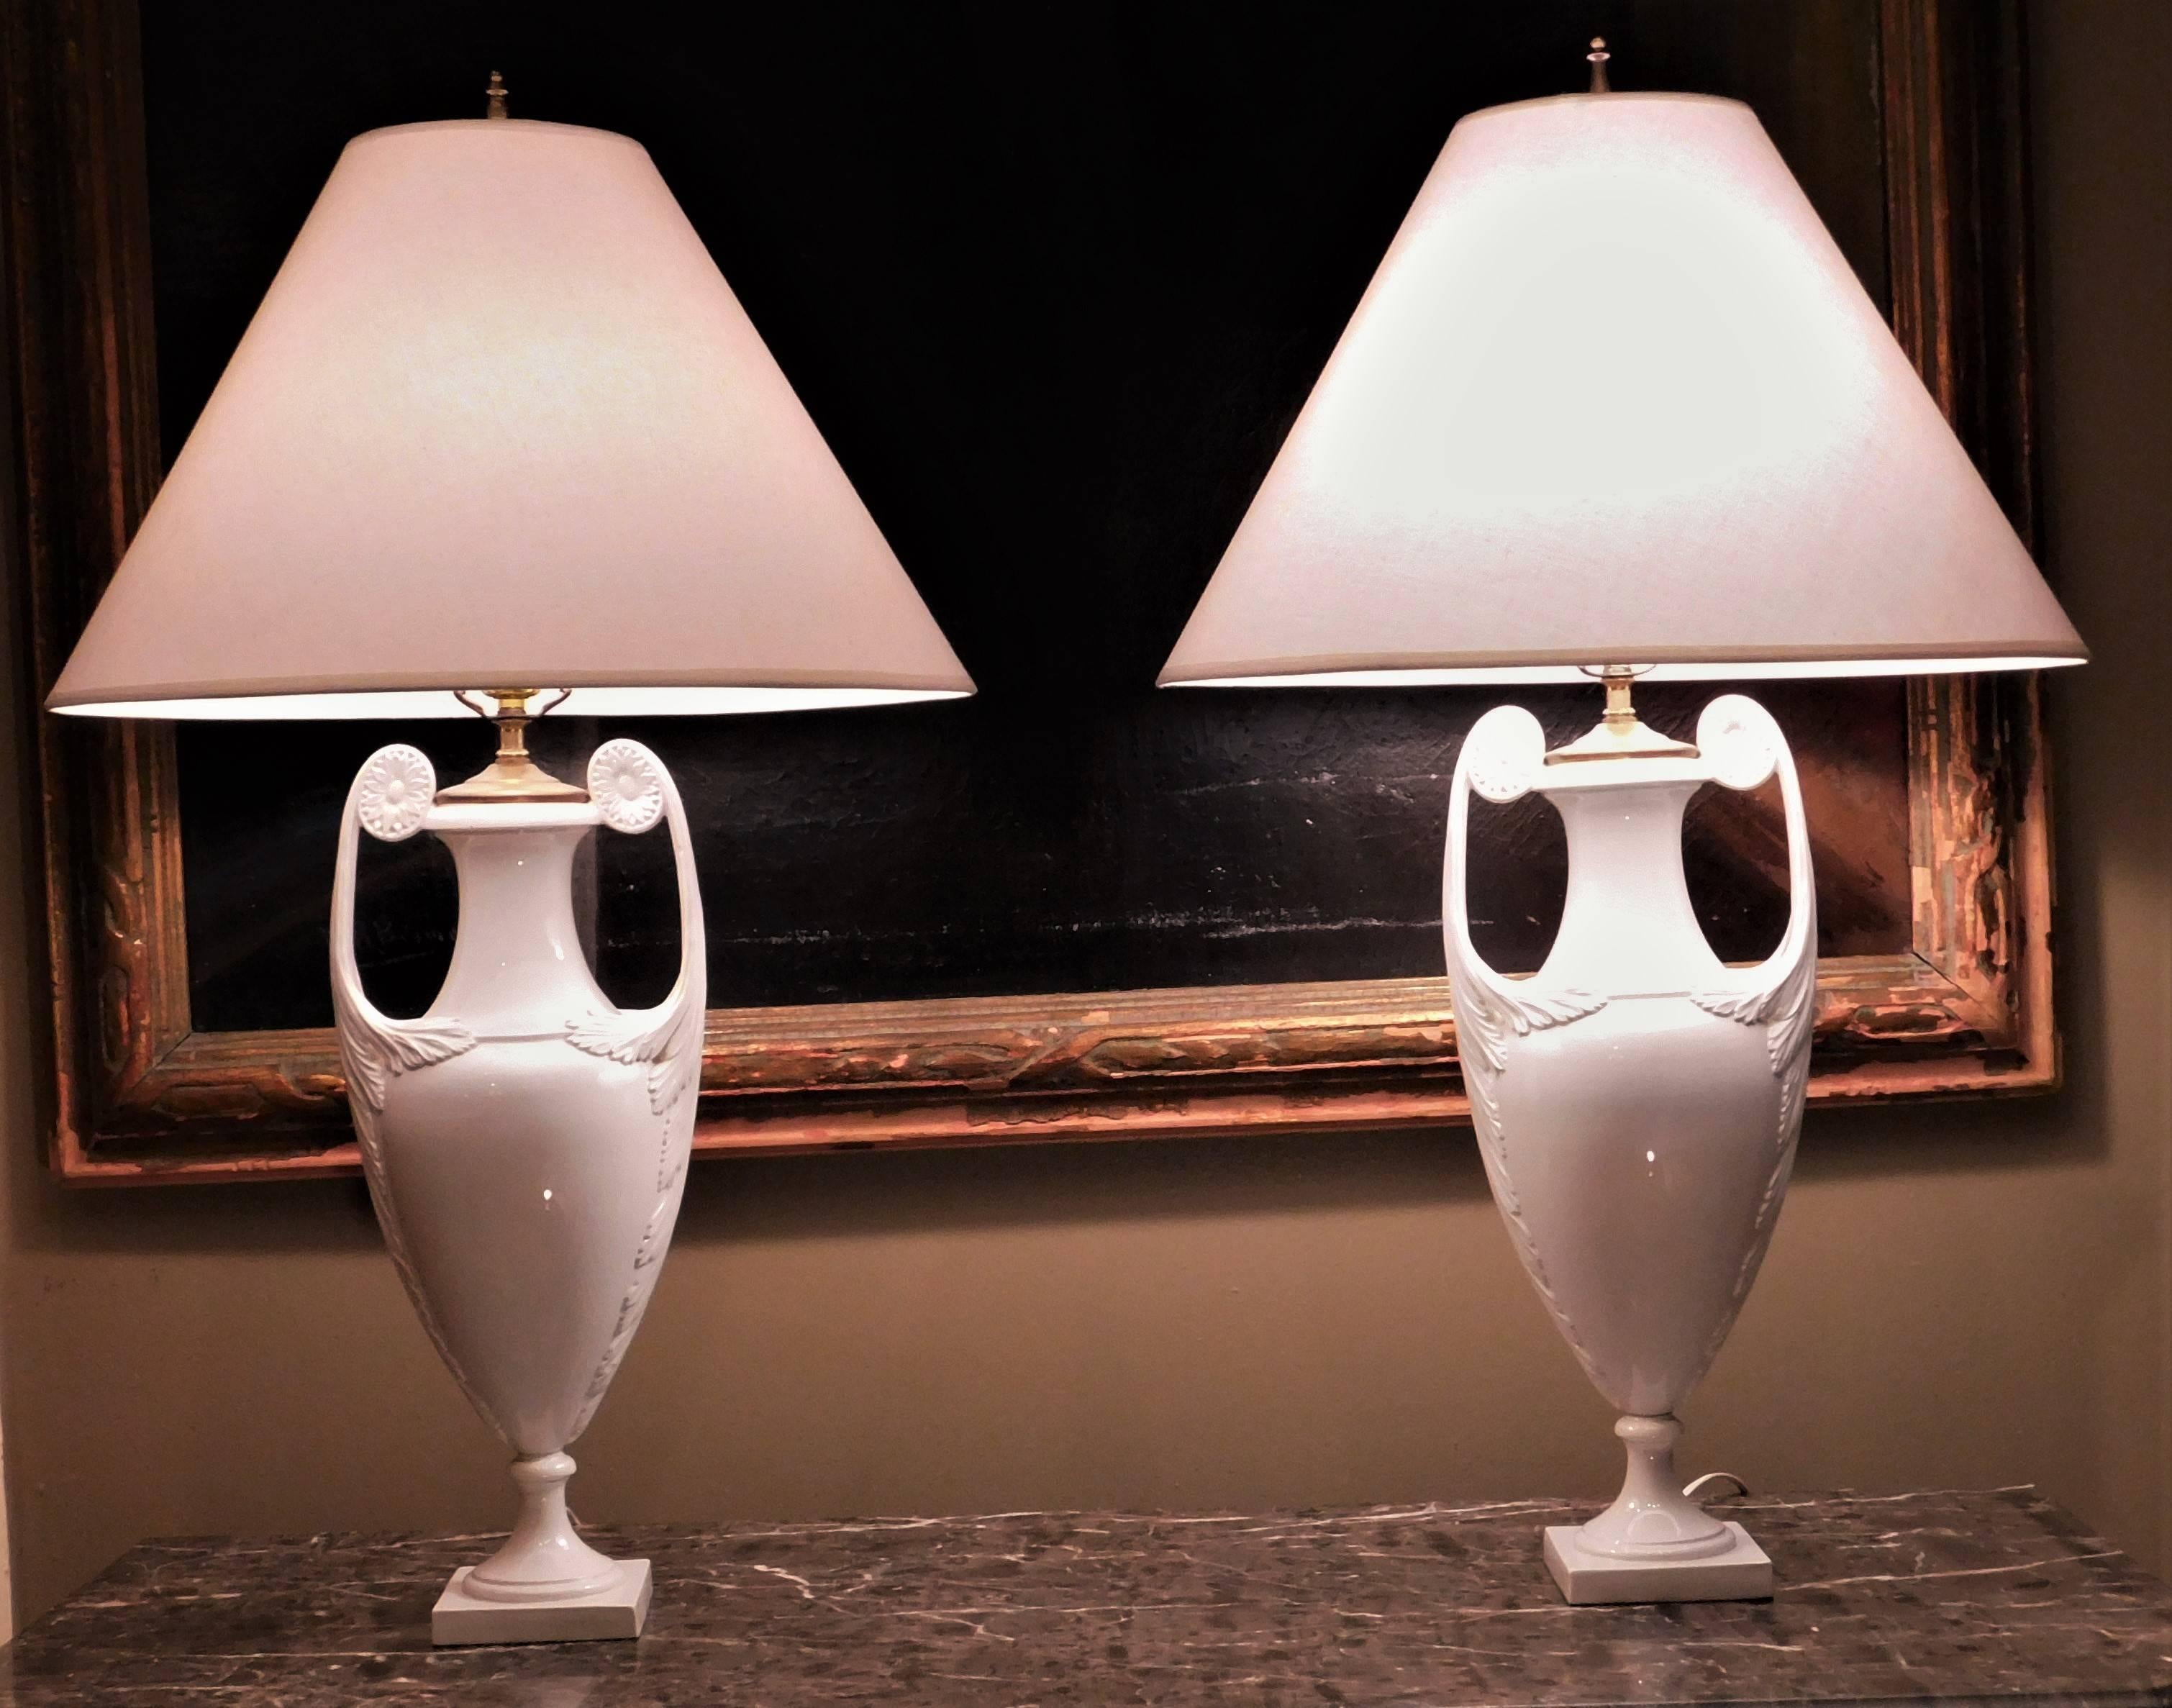 Each neoclassic urn now drilled and mounted as a lamp, with long neck above a baluster-form body with scrolled handles with paterae continuing to pendent foliage, on a square base. Dimensions shown exclude harp and shade, which are not included and